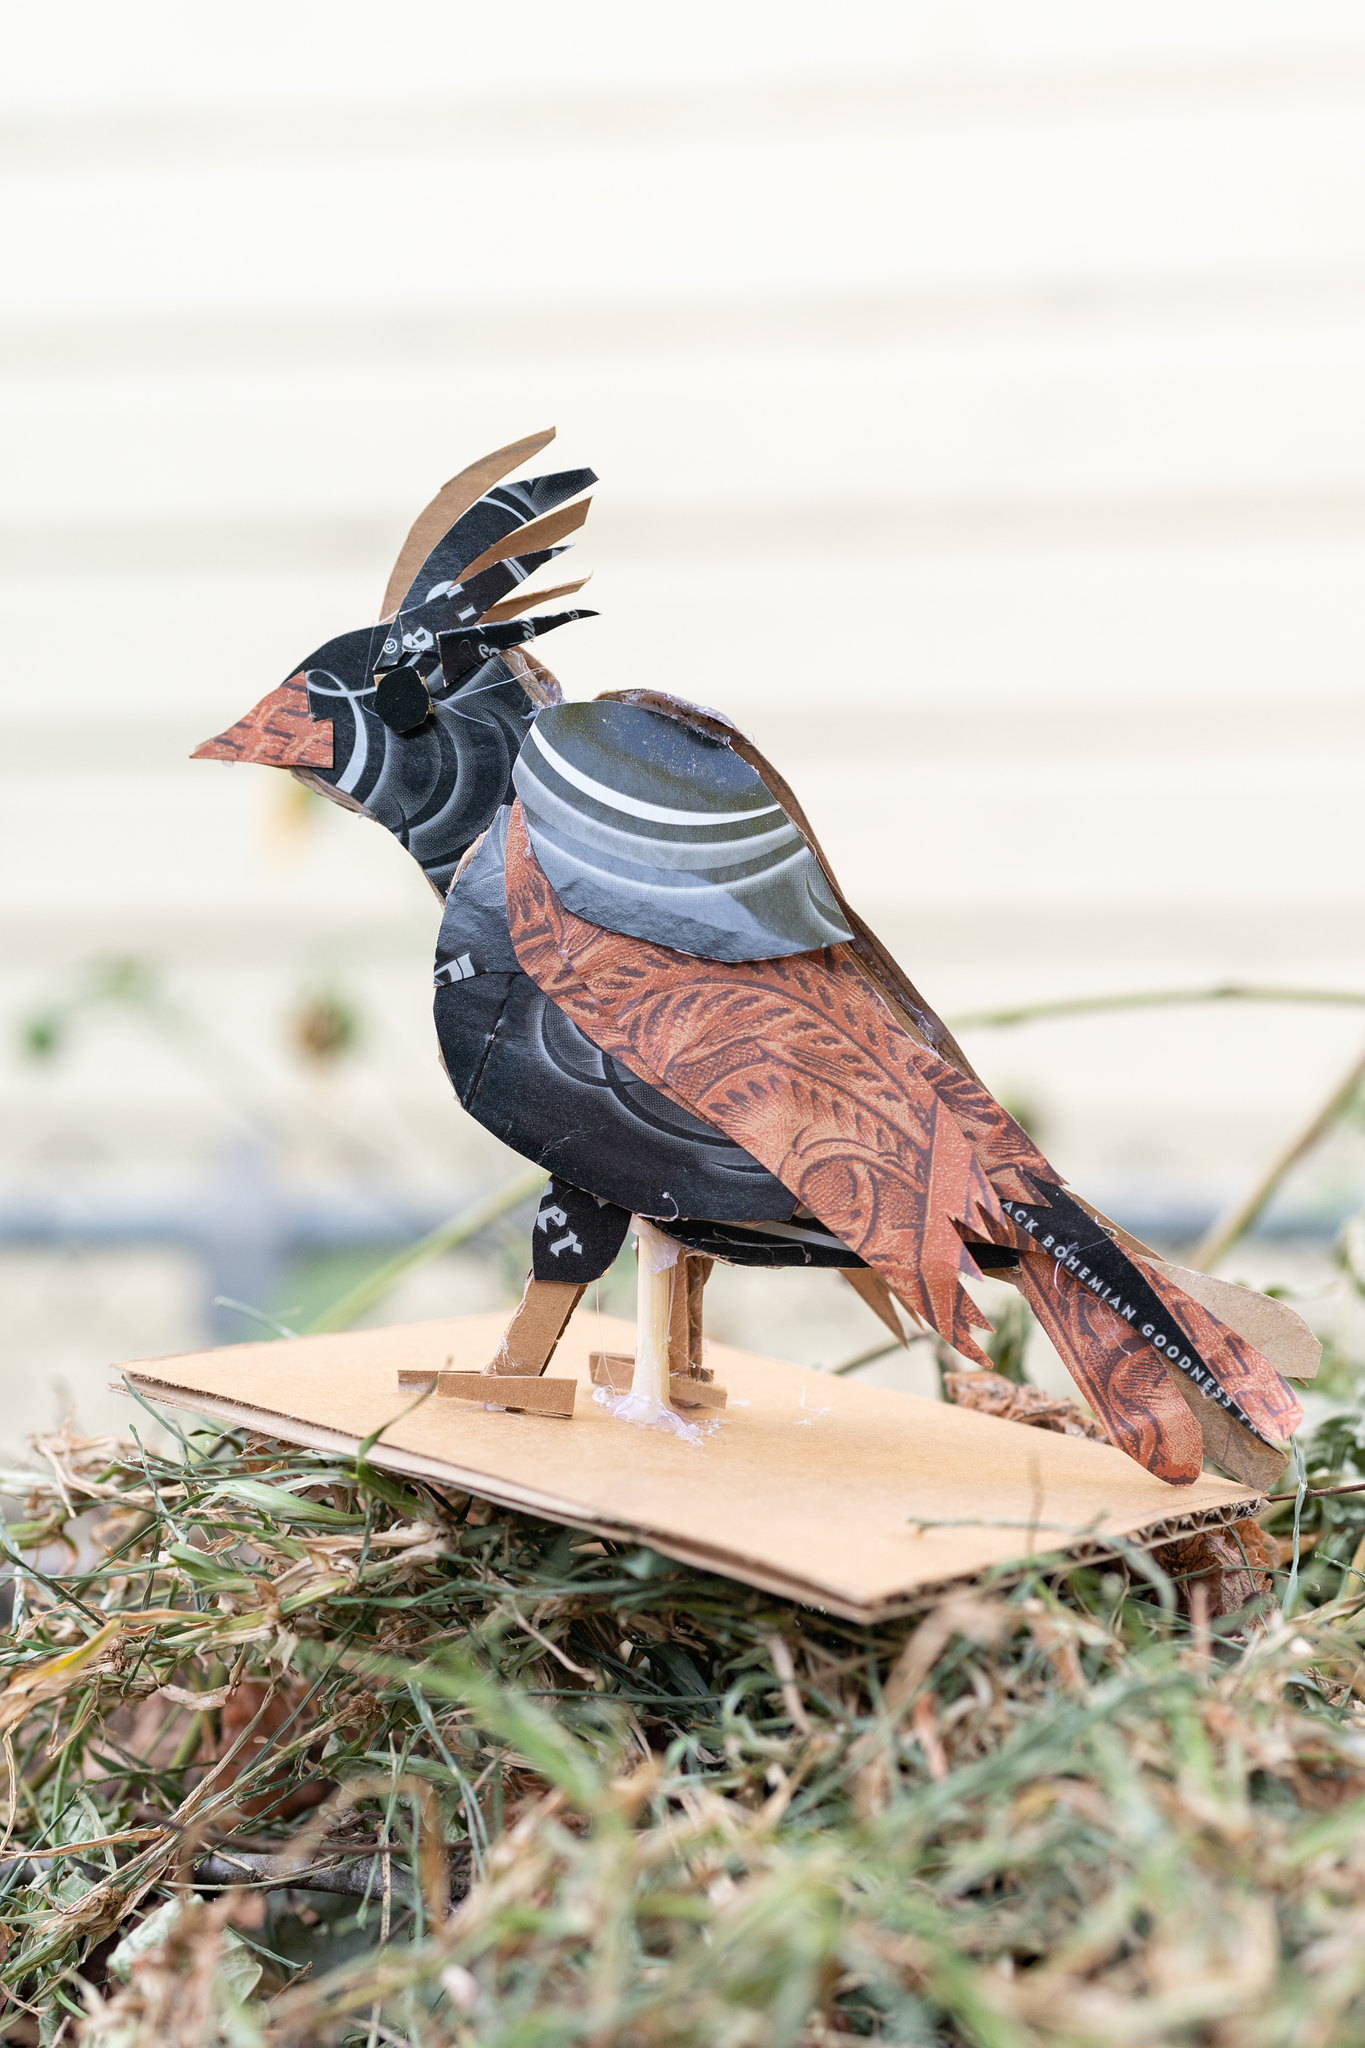 Sculpture of a crested bird made of black and brown cardboard